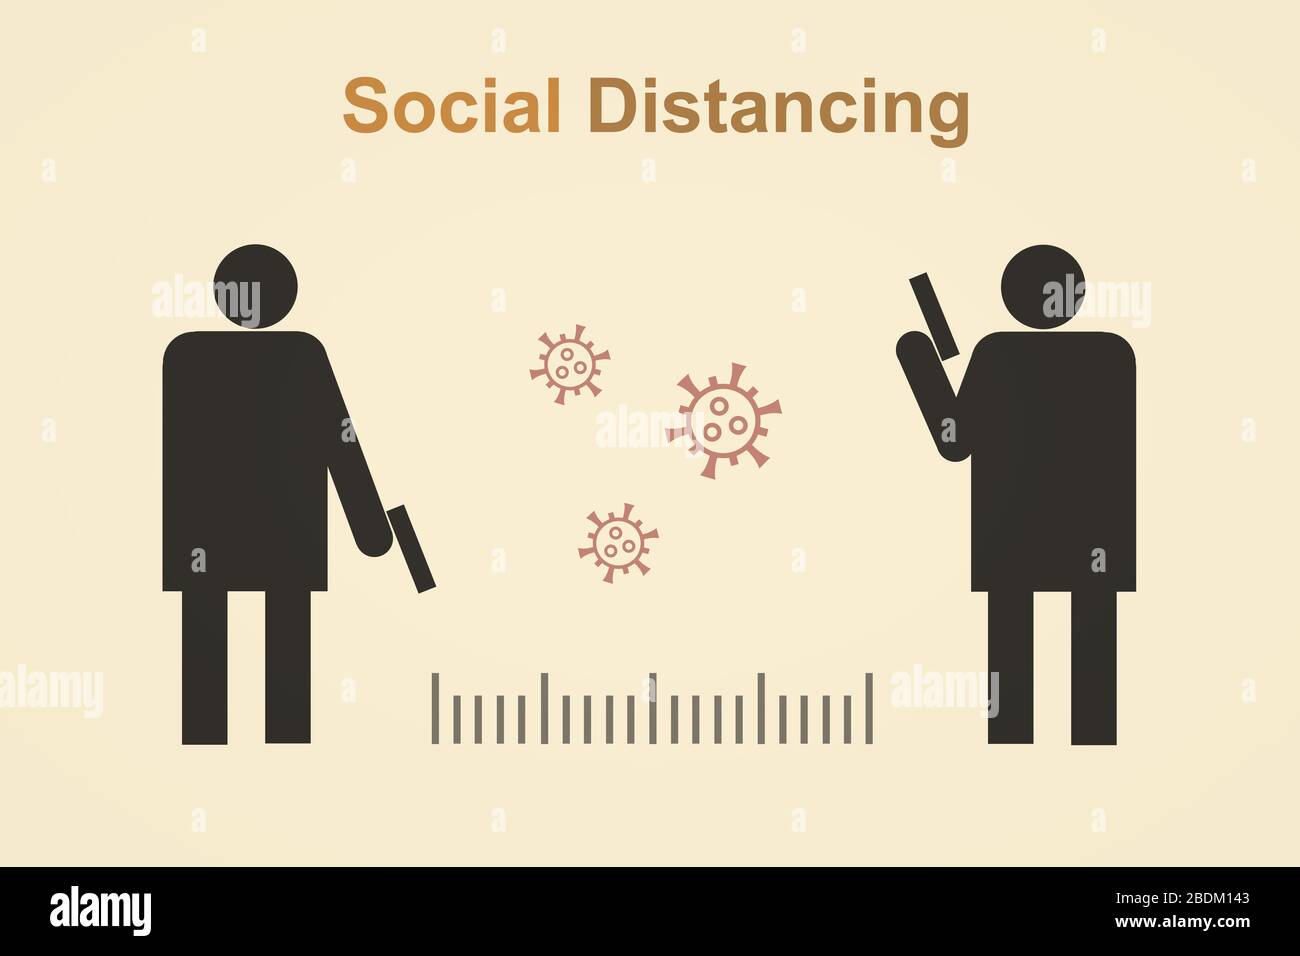 Social distancing during coronavirus outbreak and pandemic. People keep safety distance in public place to protect from COVID-19 disease. Funny illust Stock Photo